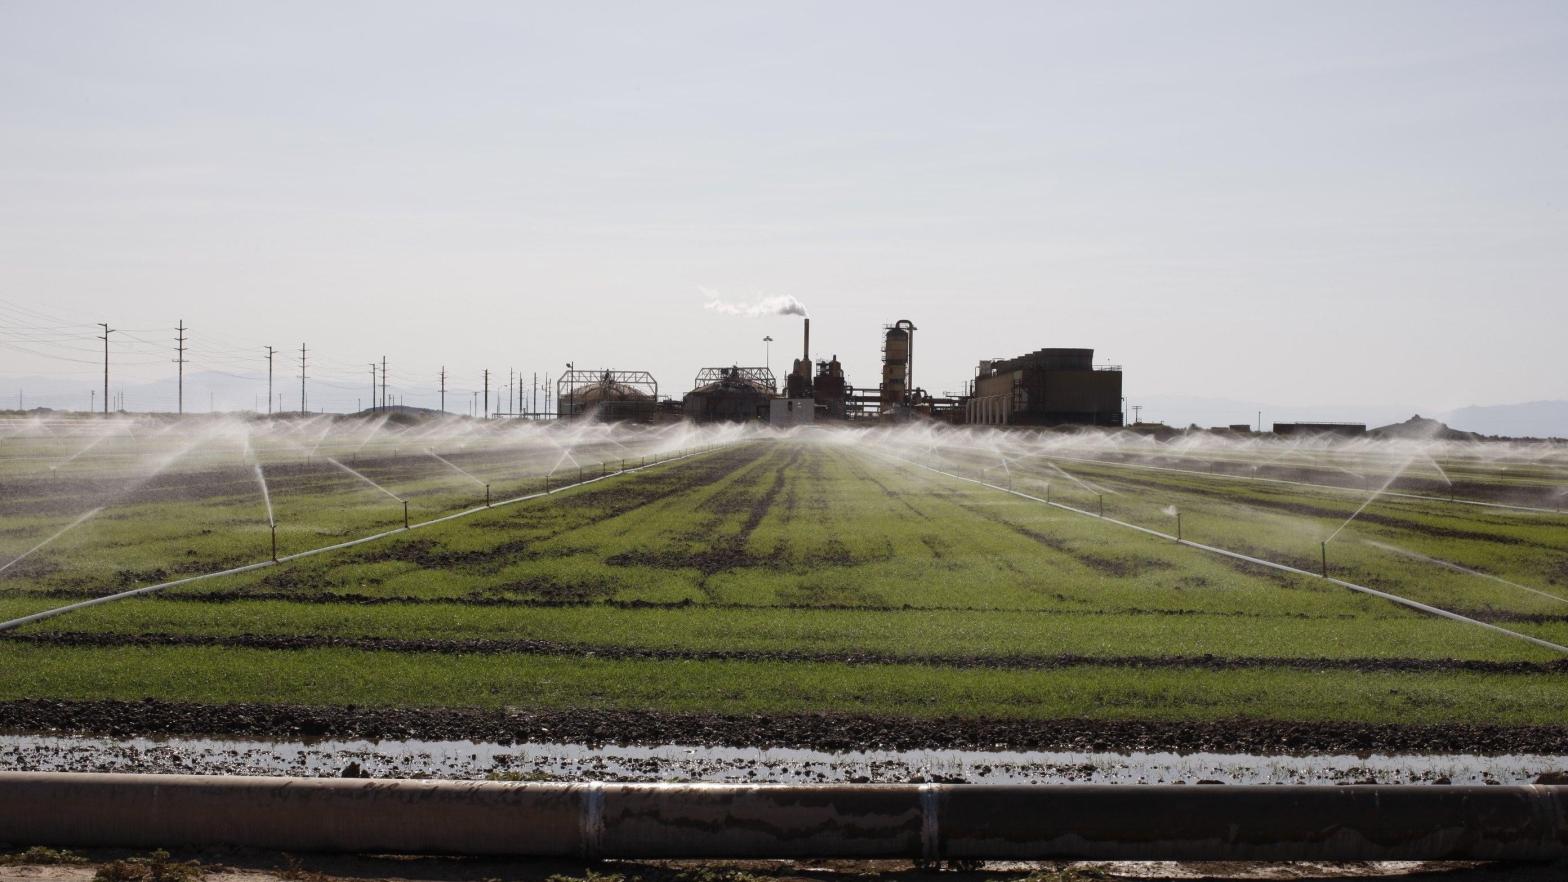 A sprinkler system sprays crops with water from an irrigation canal set in Imperial Valley, an agricultural area that traditionally uses water from the Colorado River. (Photo: Brent Stirton, Getty Images)